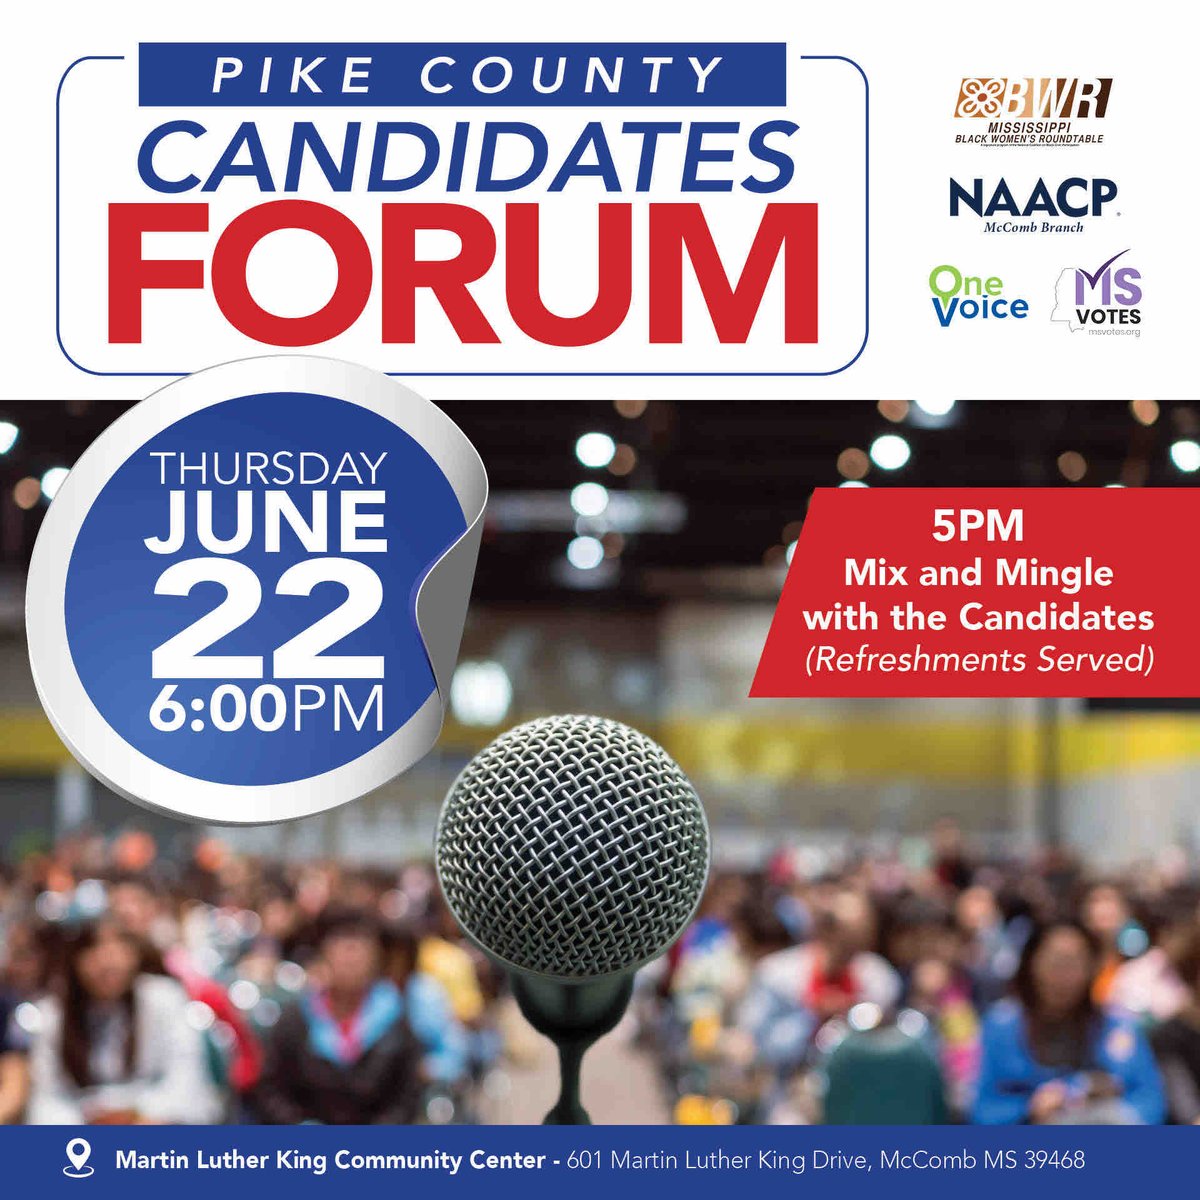 Pike County Candidates Forum
Thursday, June 22 at 6pm

Mix & Mingle with the Candidates at 5pm!

📍 Martin Luther King Community Center
601 Martin Luther King Drive
McComb, MS 39468

#MSVotes #Up2Us #PikeCounty #McComb